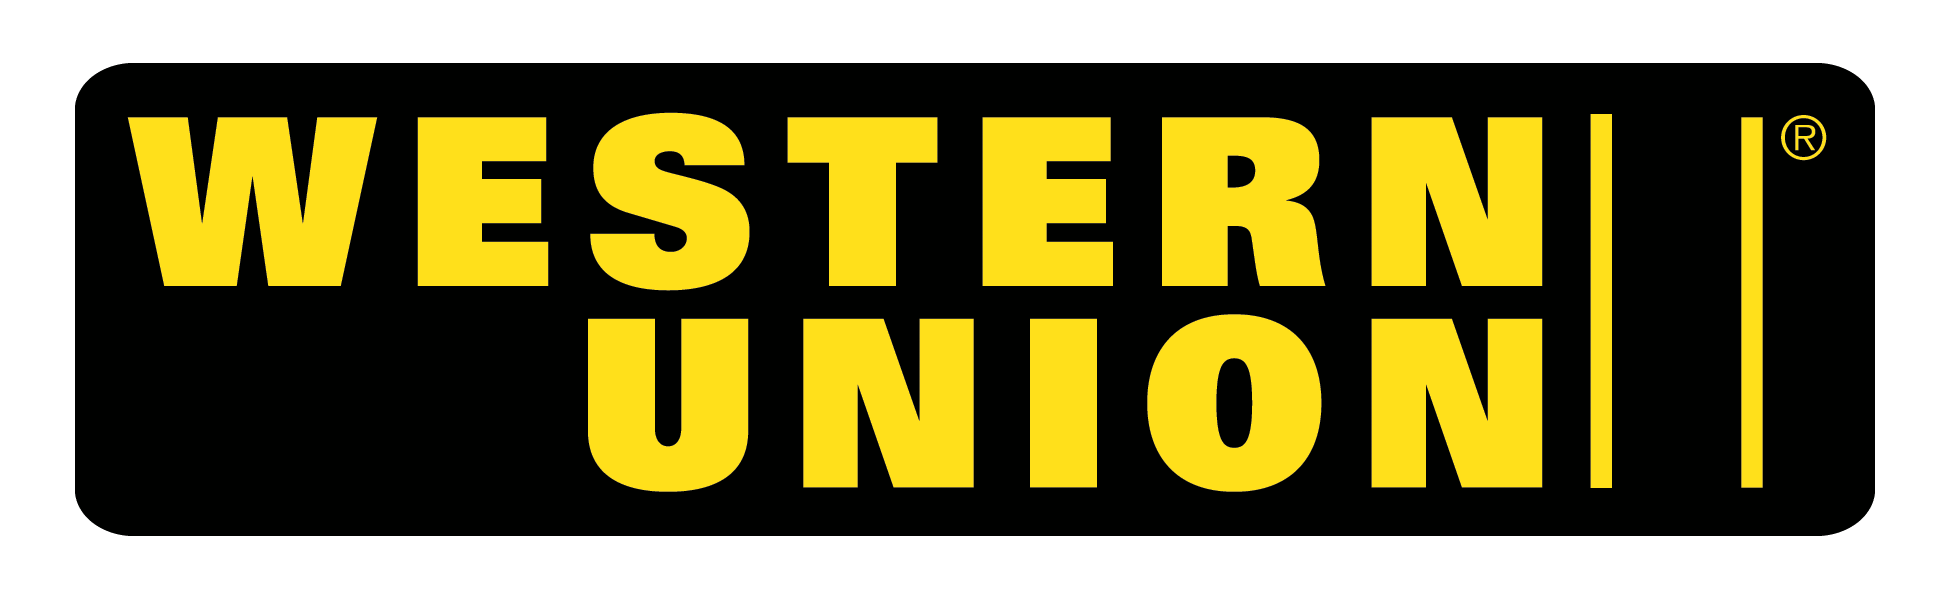 Western Union logo (black background with yellow lettering)